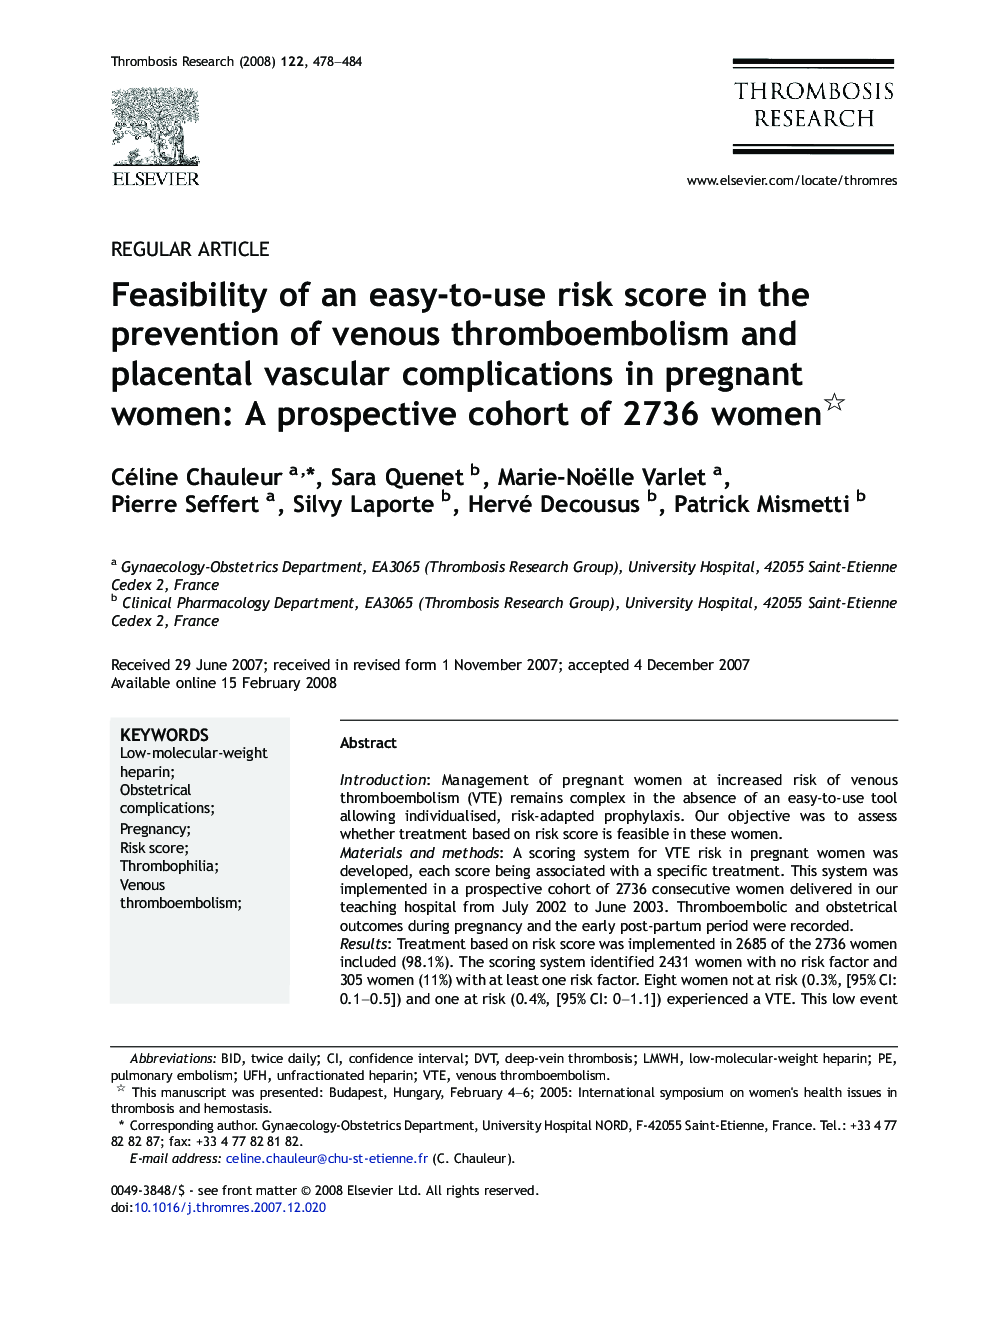 Feasibility of an easy-to-use risk score in the prevention of venous thromboembolism and placental vascular complications in pregnant women: A prospective cohort of 2736 women 